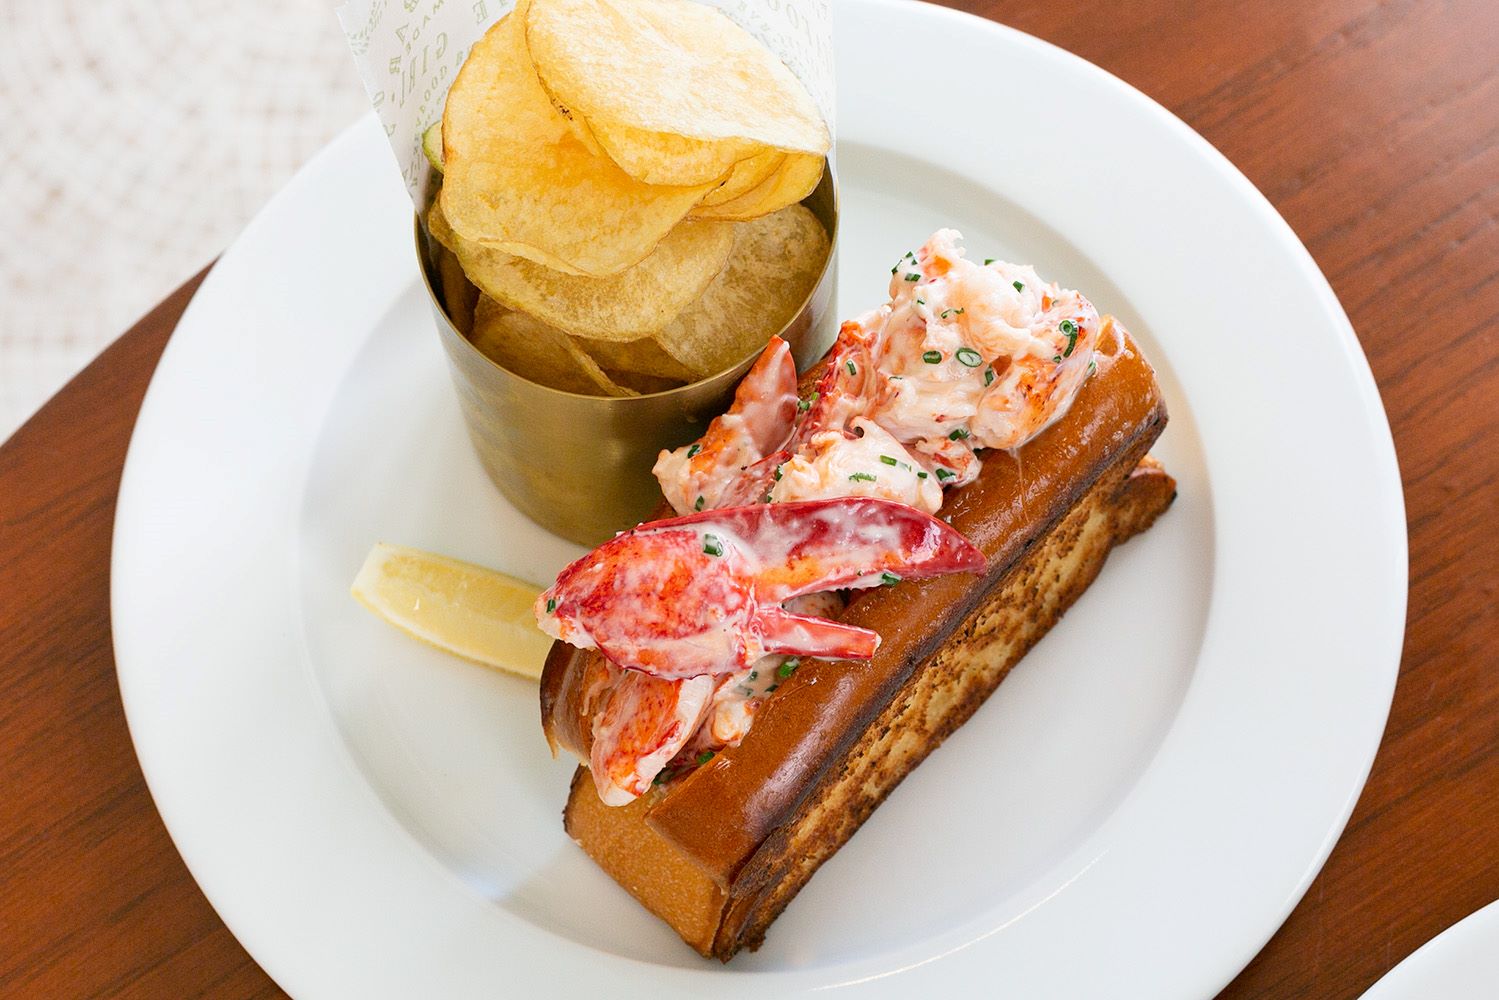 An image of a lobster roll from Saltie Girl.